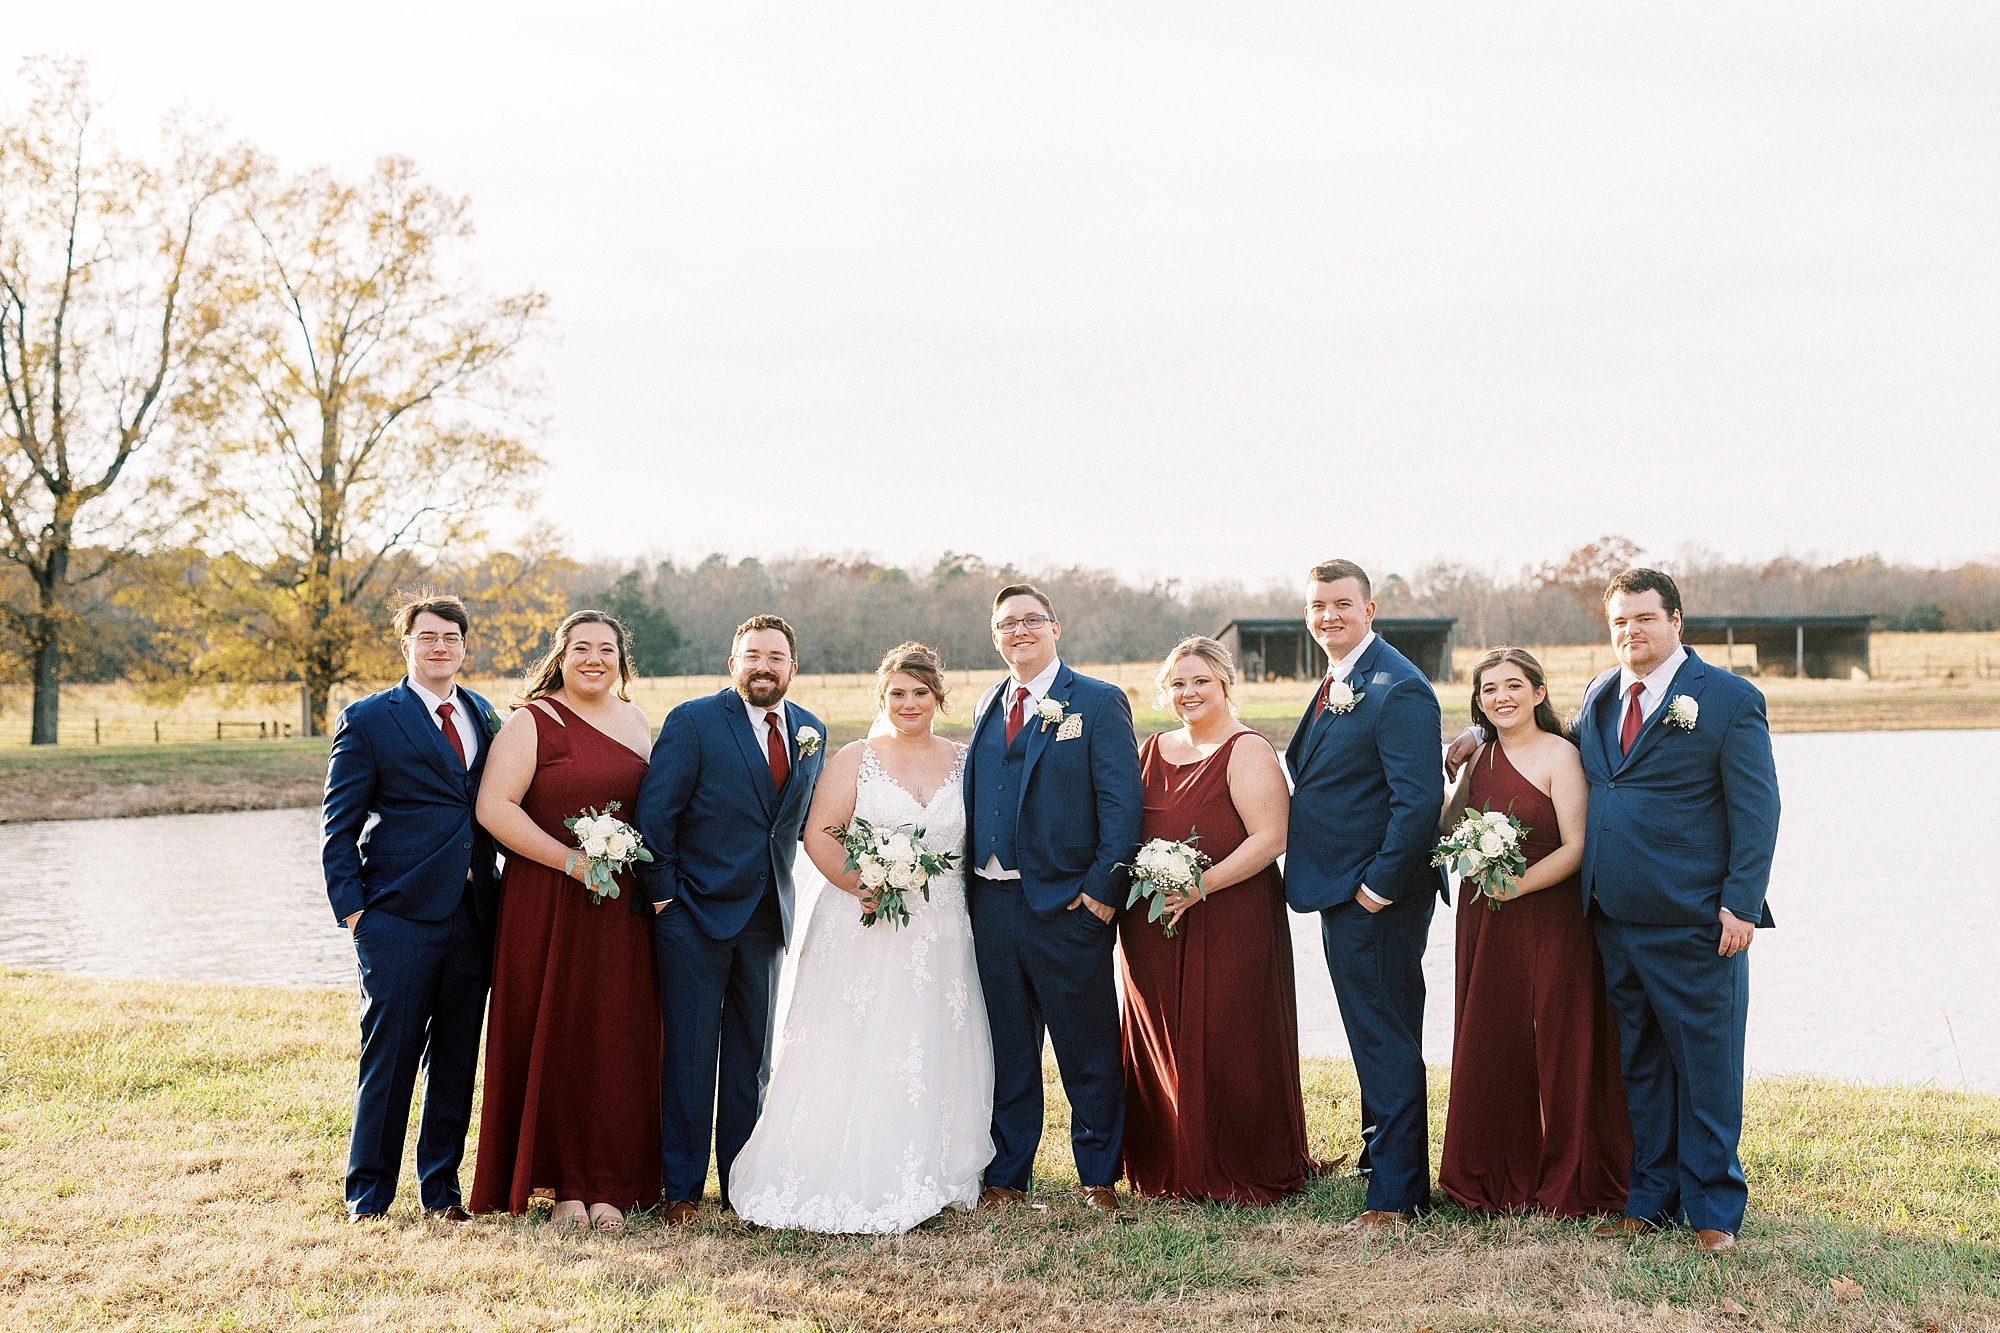 bride and groom stand with wedding party in burgundy gowns and navy suits 